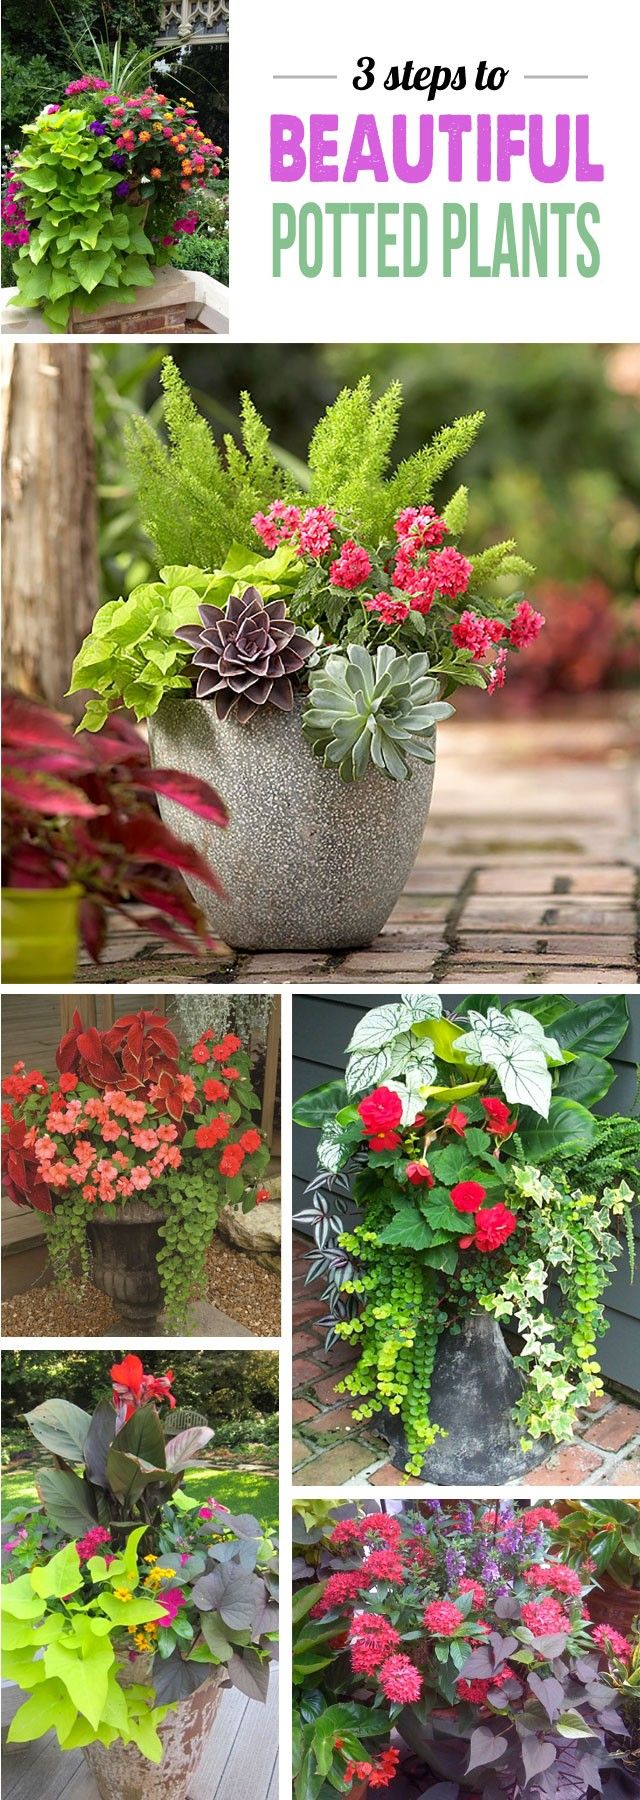 Great tips for making stunning potted plant arrangements - can't wait to add...